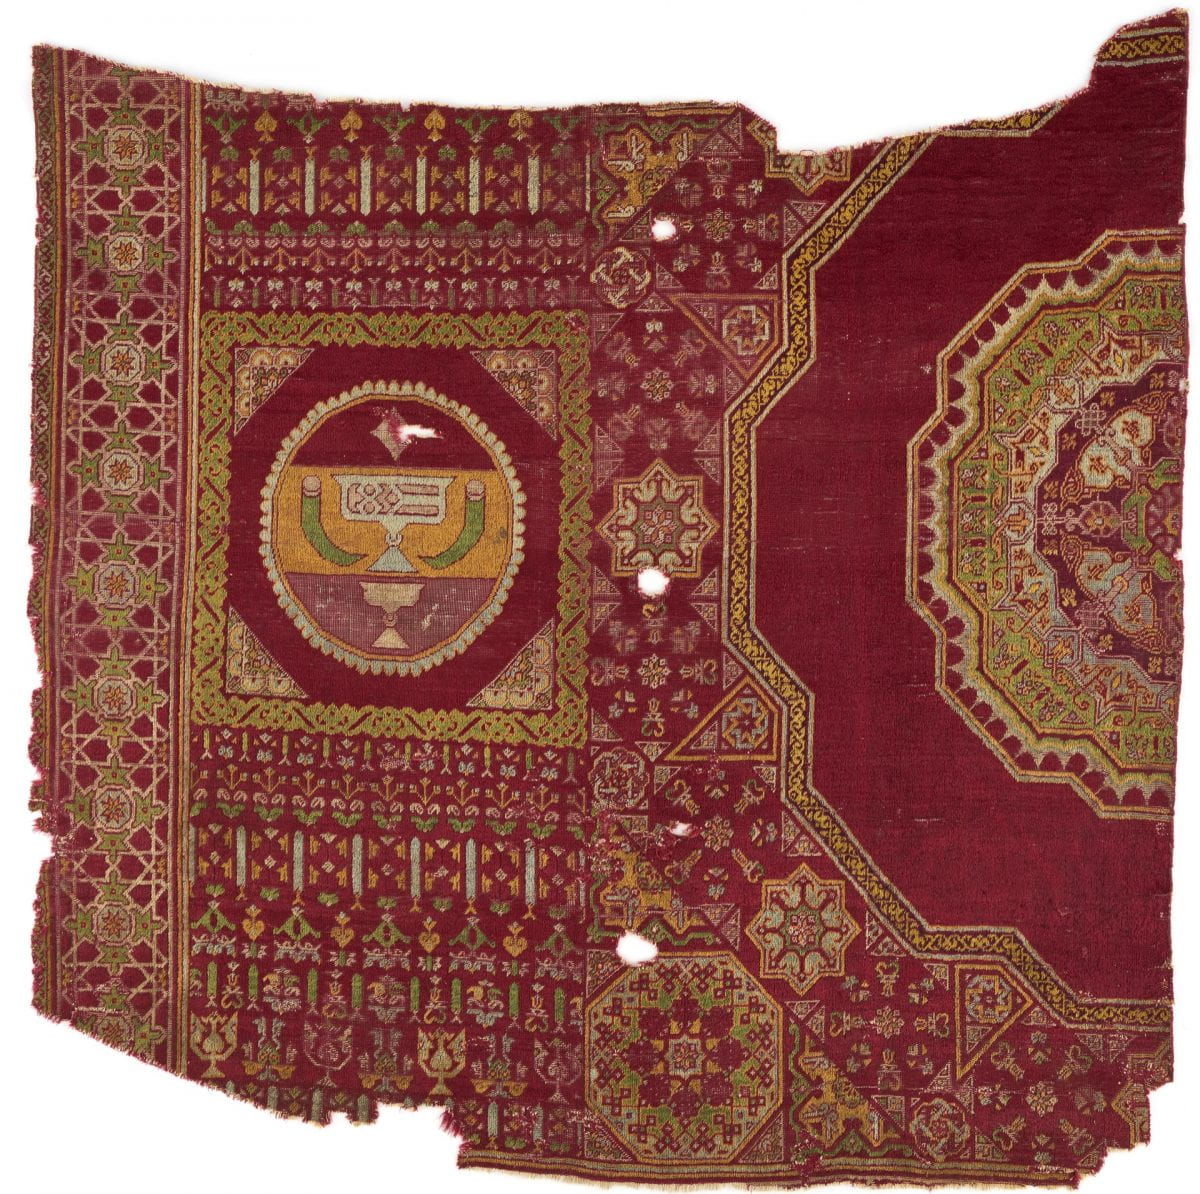 Carpet fragment with central lobed octagonal medallion on a red ground